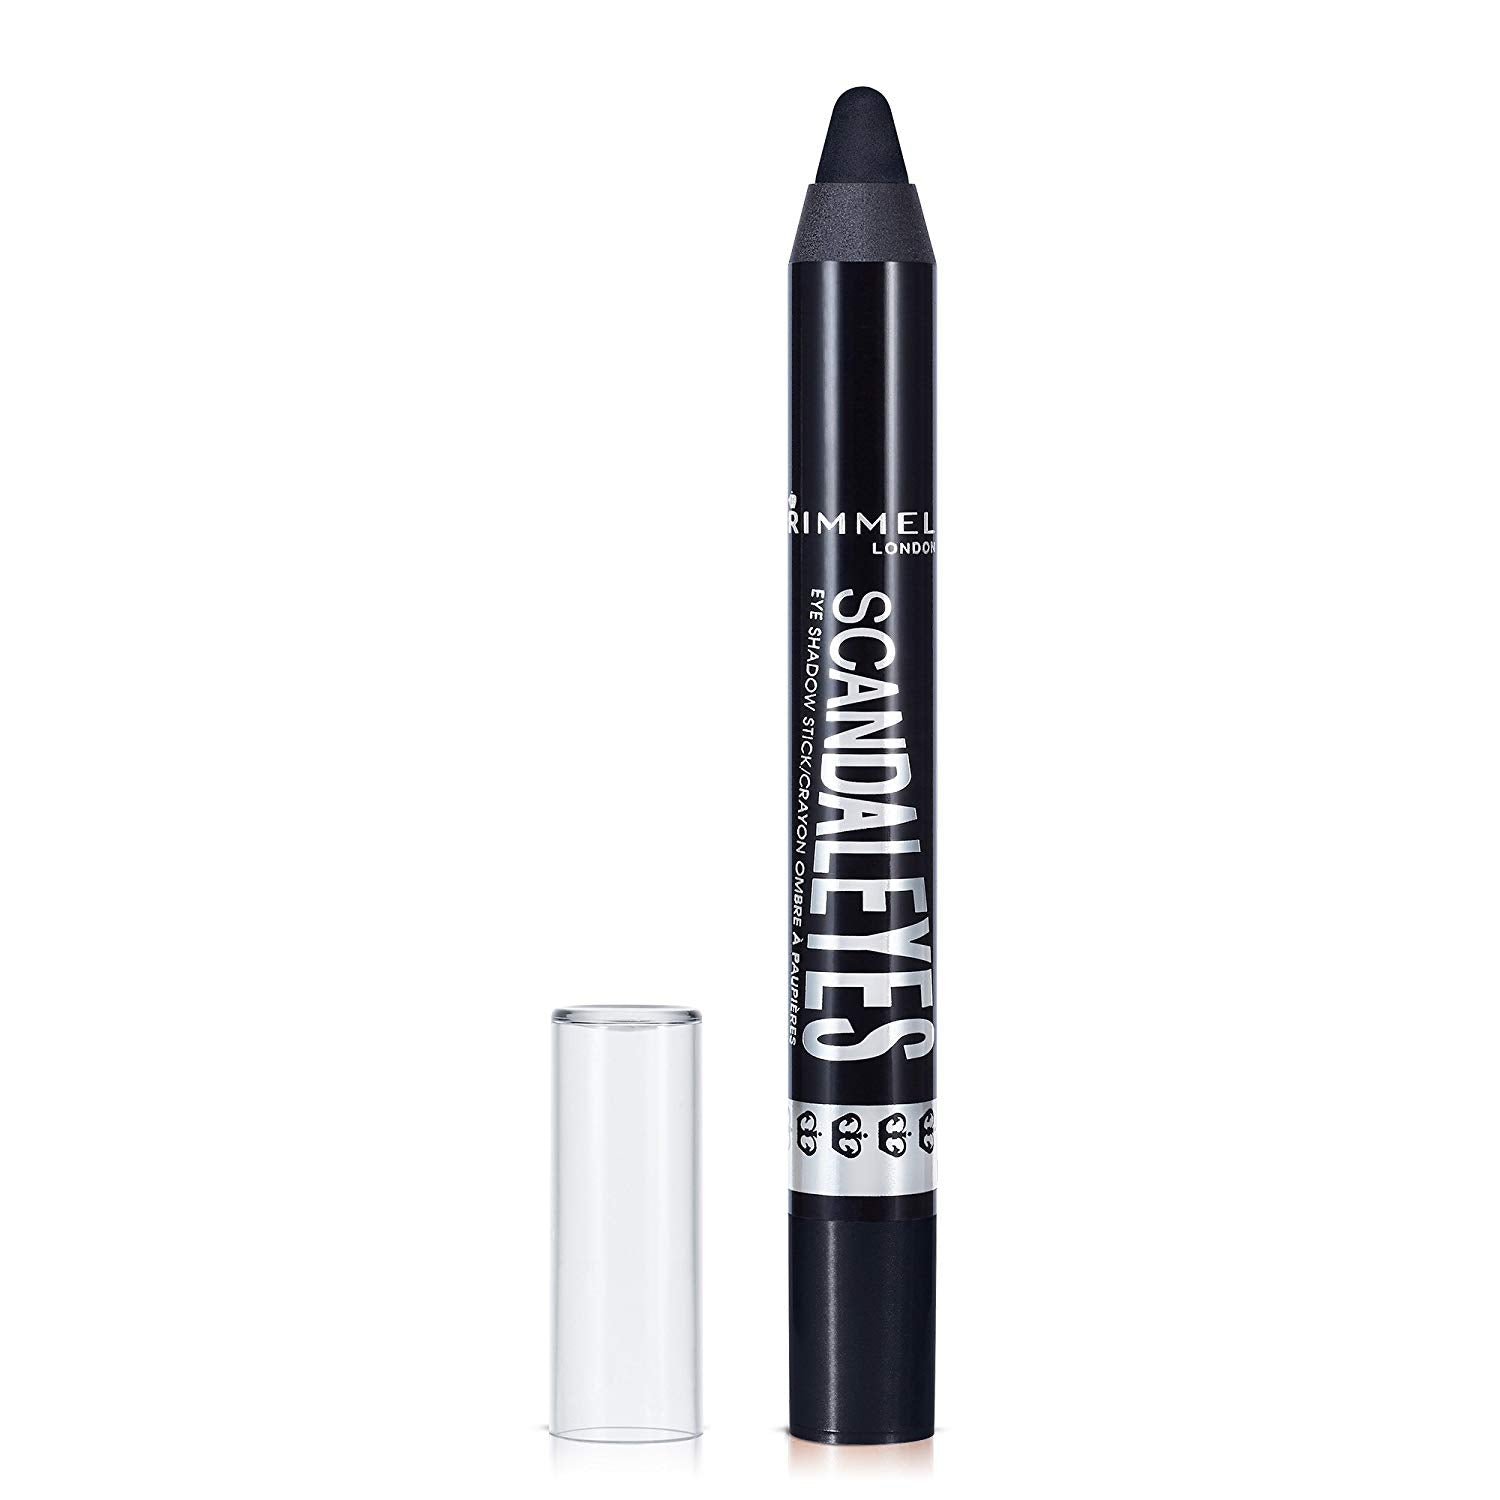 Buy  Rimmel London Scandaleyes Shadow Stick - 8 Blackmail - at Best Price Online in Pakistan